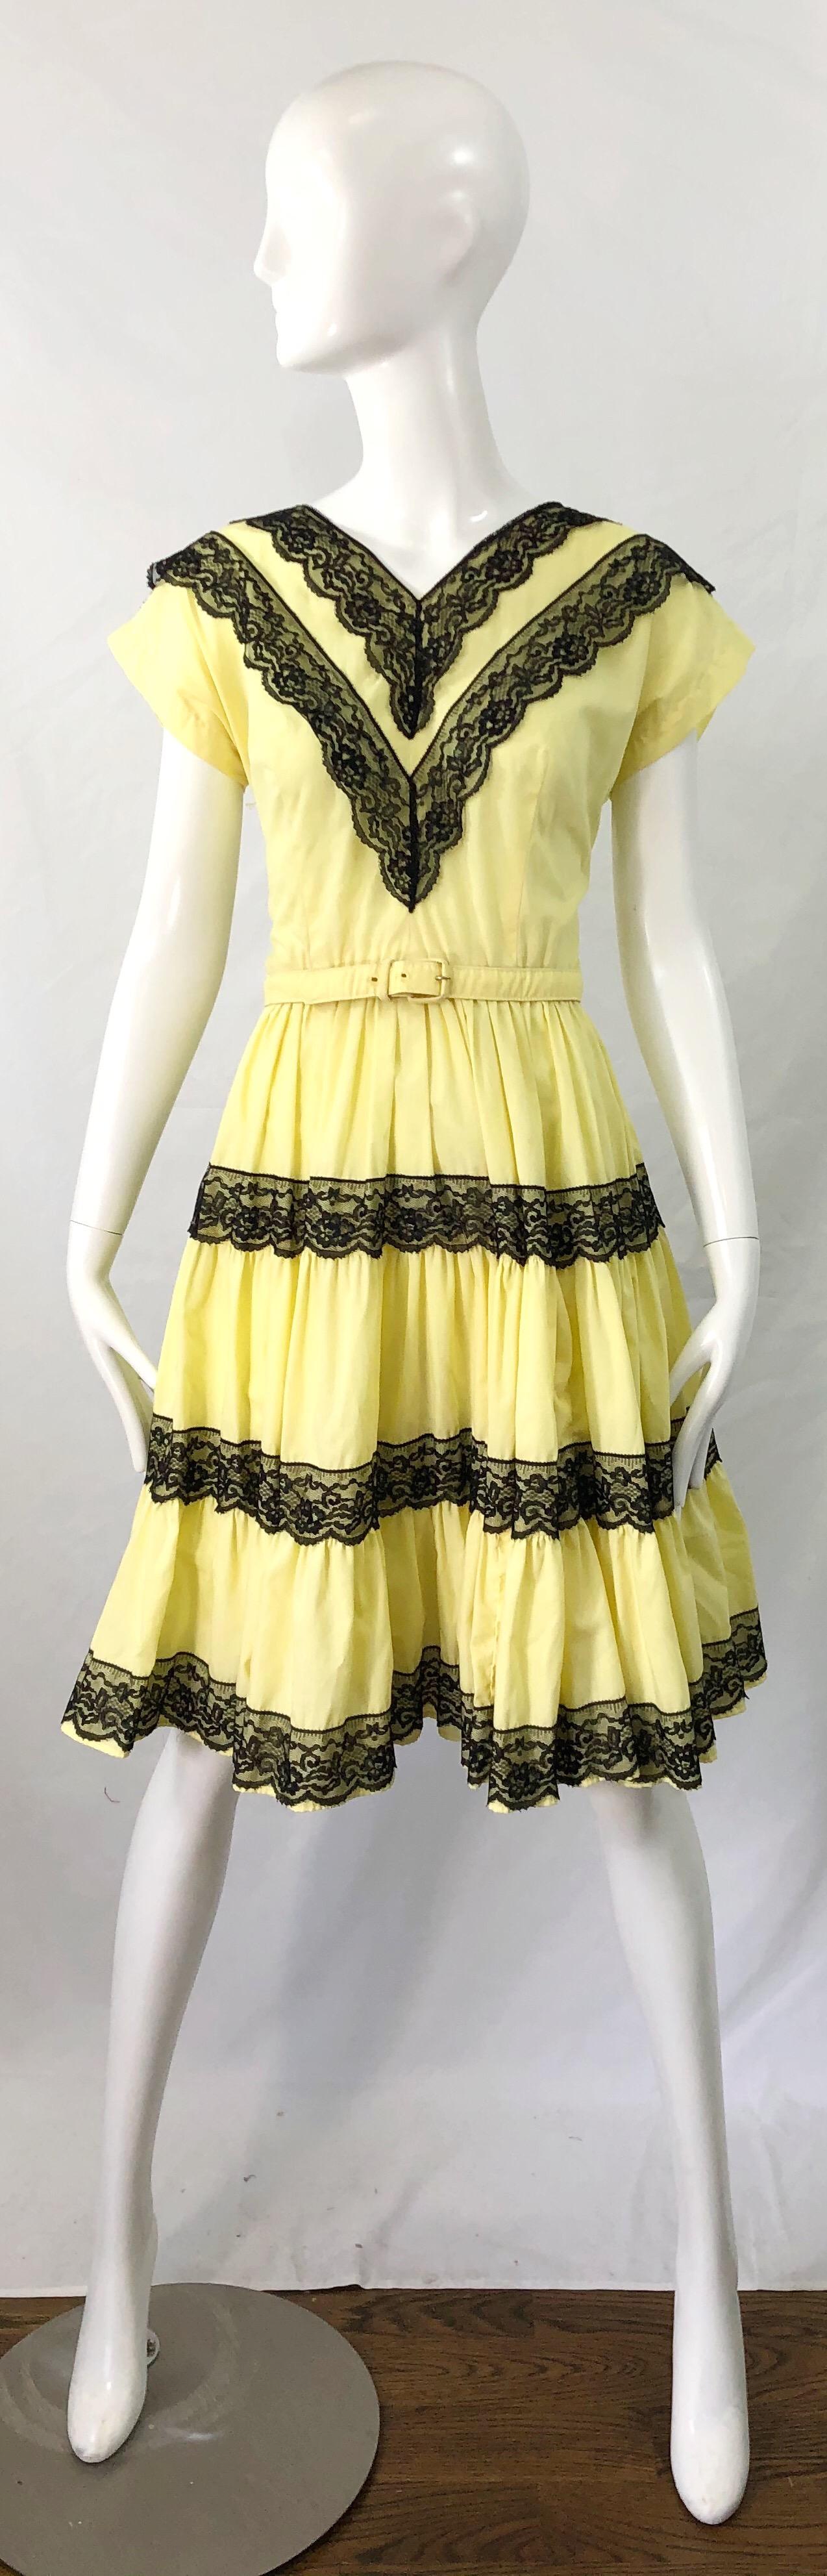 Beautiful 1950s BETTINA OF MIAMI lightweight cotton and lace fit n' flare belted dress ! Features a pale yellow cotton and black lace. Fitted tailored bodice with a forgiving full skirt. Full metal zipper up the back with 
hook-and-eye closure.